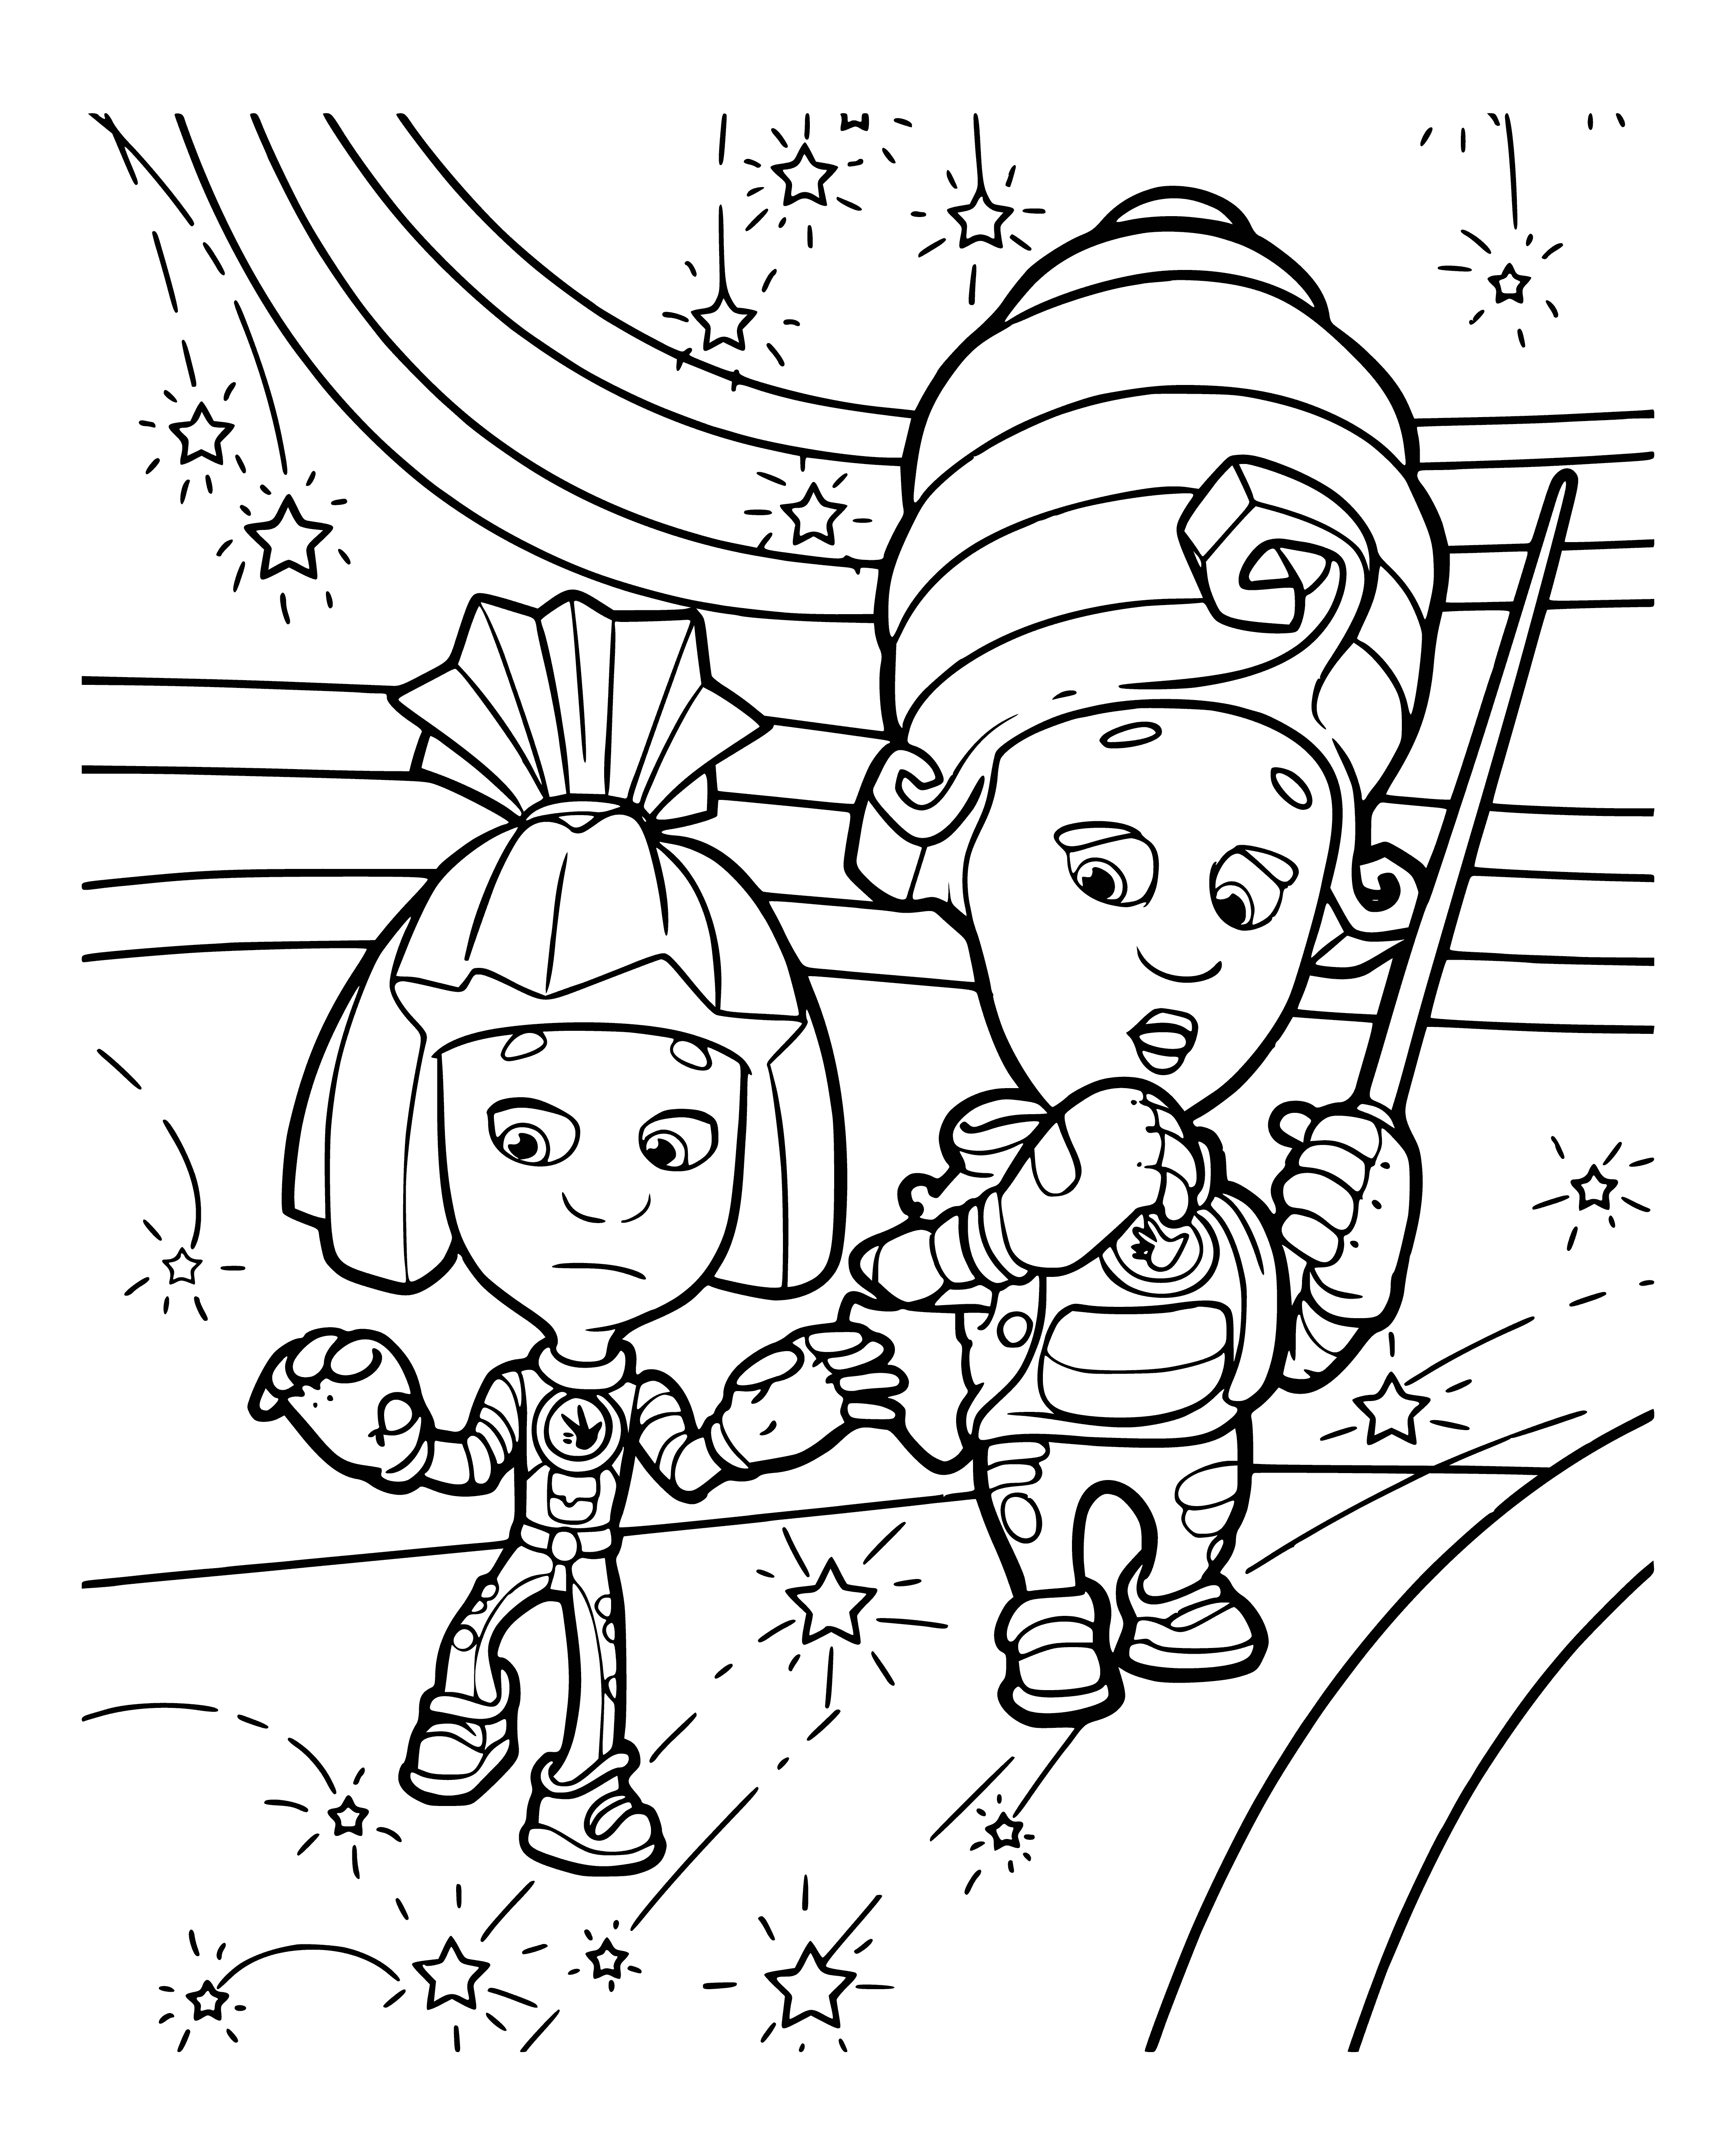 coloring page: Two Fixie people, Baby Mamas and Simka, smiling in front of a big green house. #fixies #friends